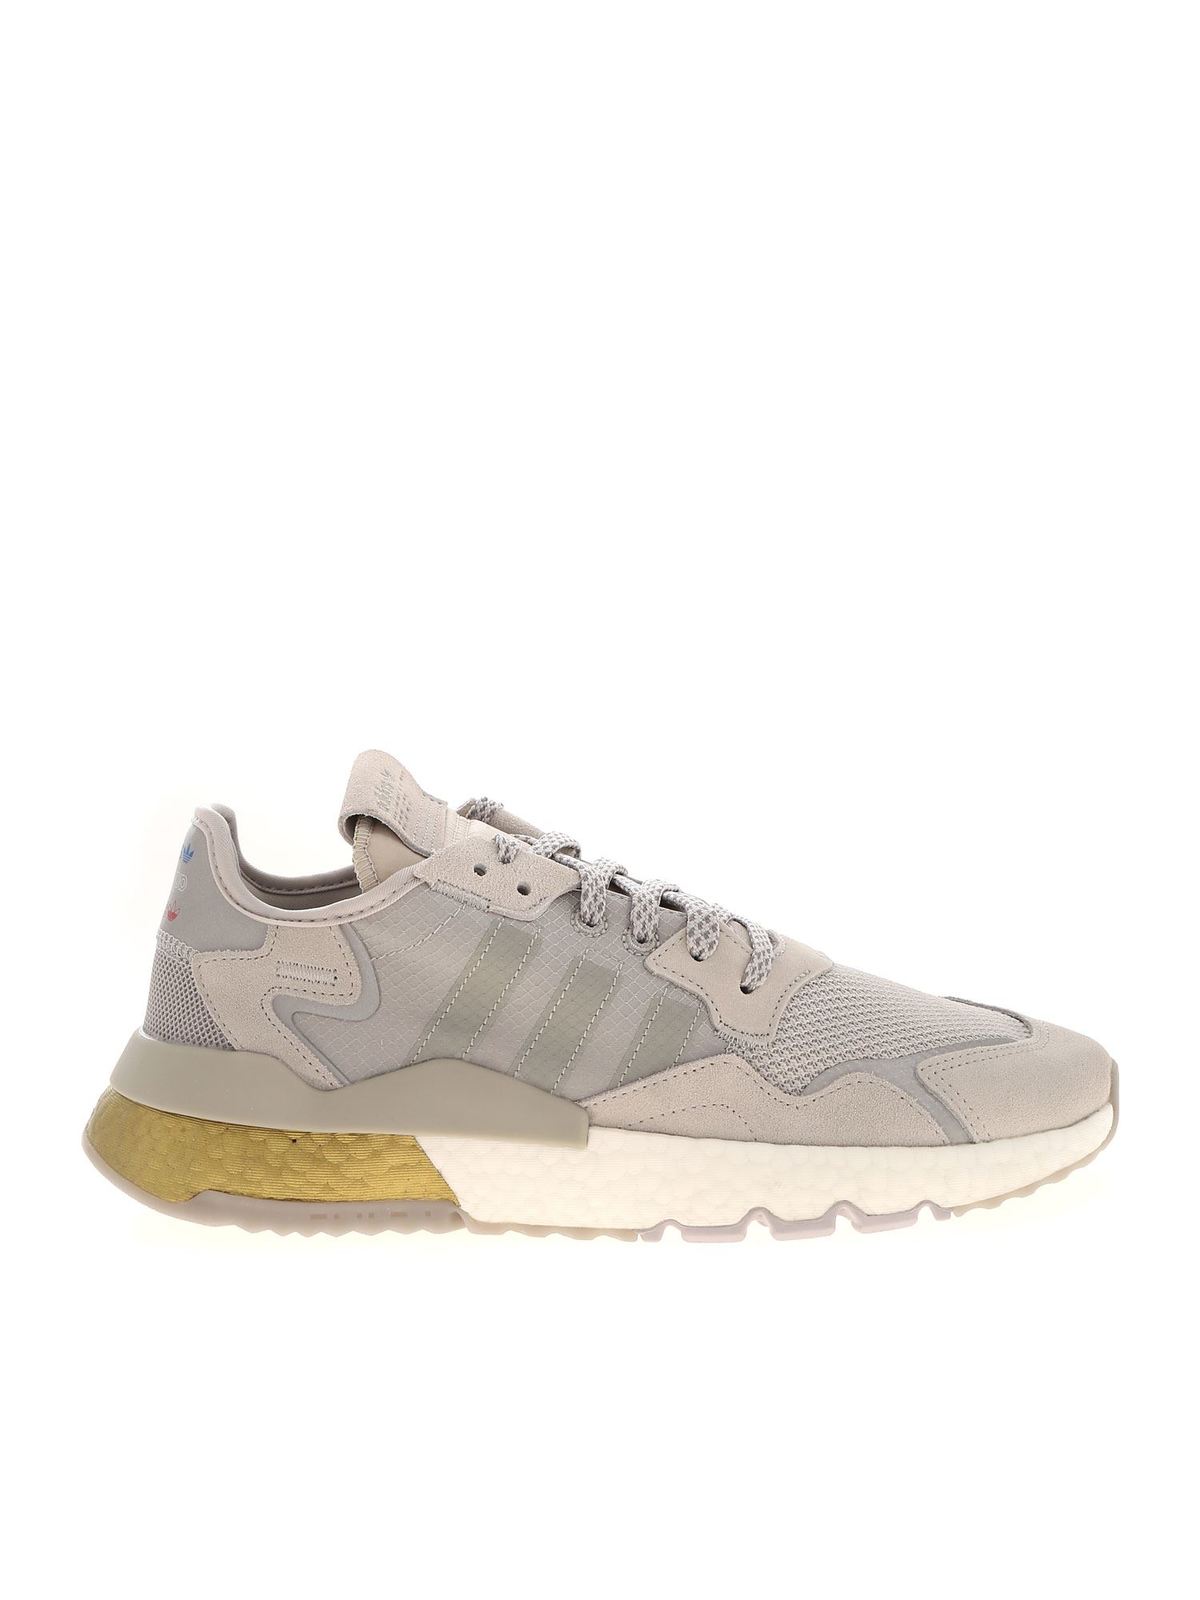 metal prosa Outlaw Trainers Adidas Originals - Nite Jogger sneakers in grey - FW5335